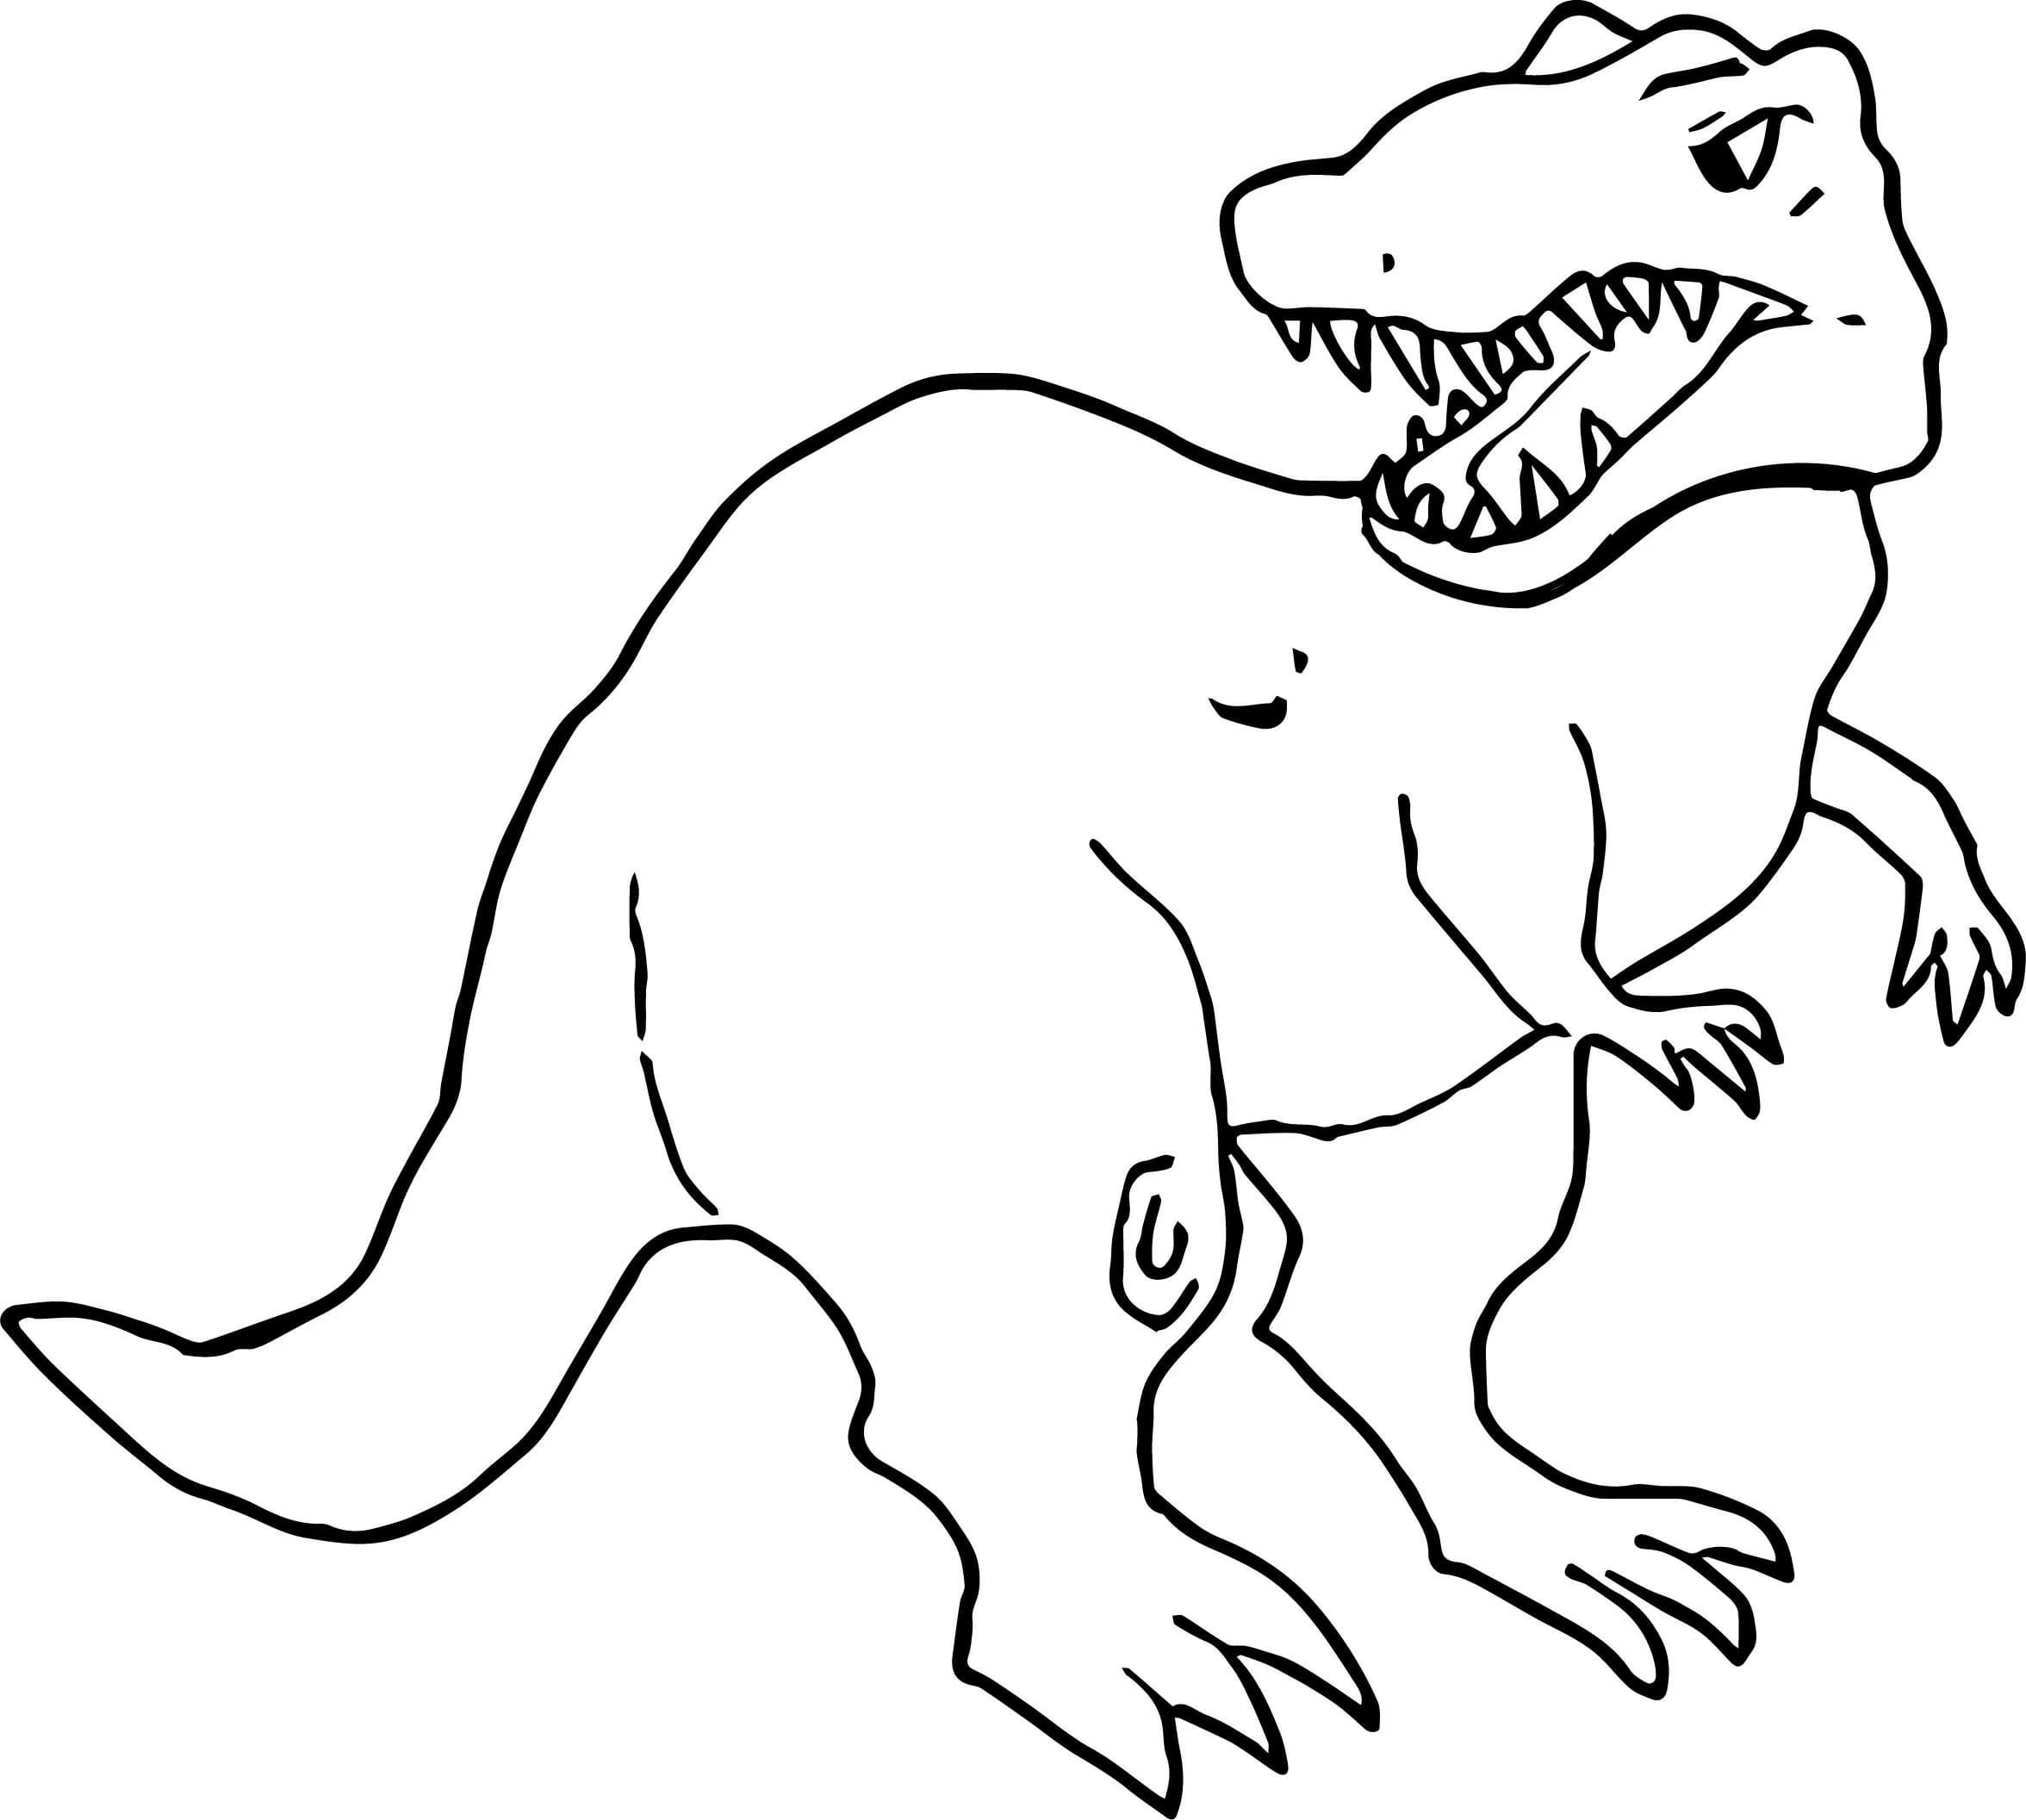 Coloring page T-rex An ancient inhabitant of our planet